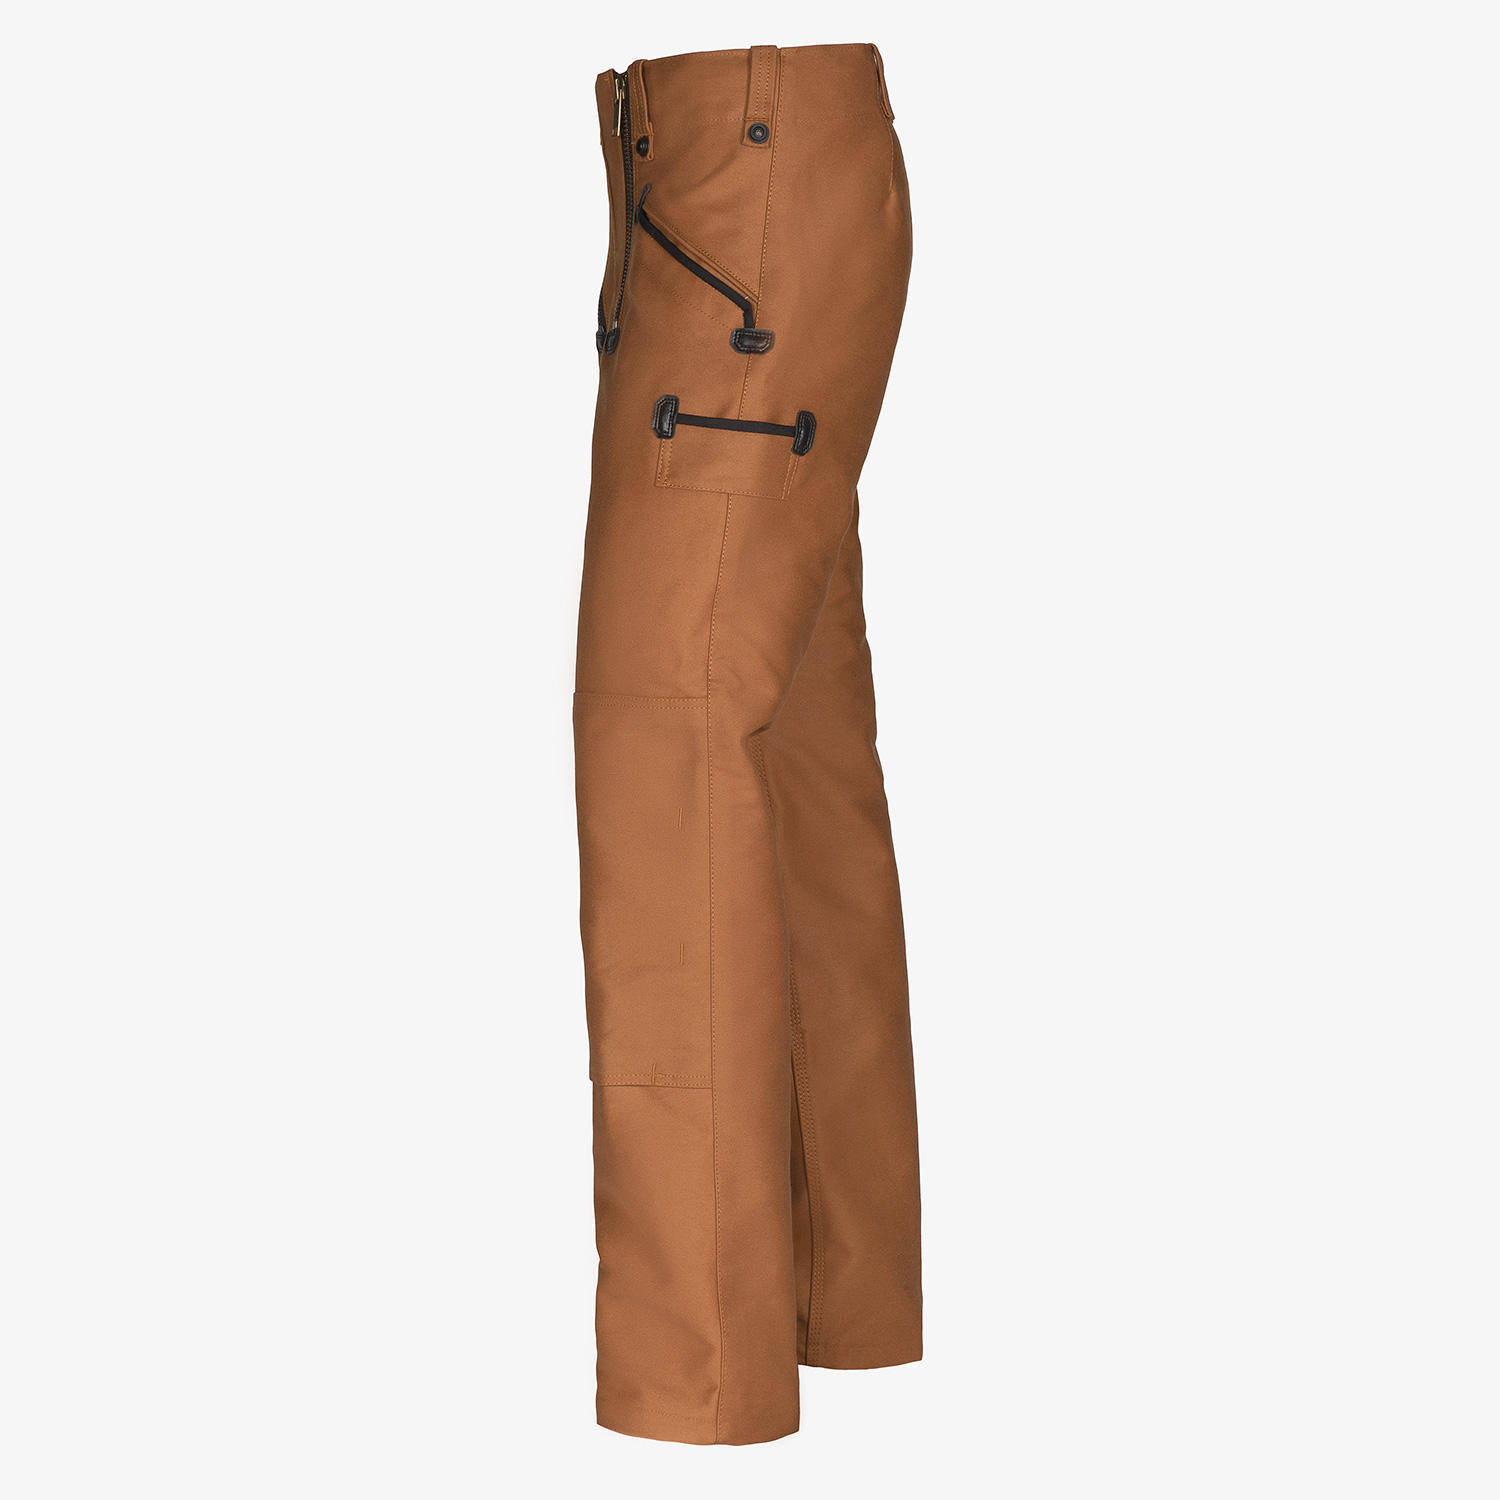 FAIBIAN guild moleskin trousers without bell bottom